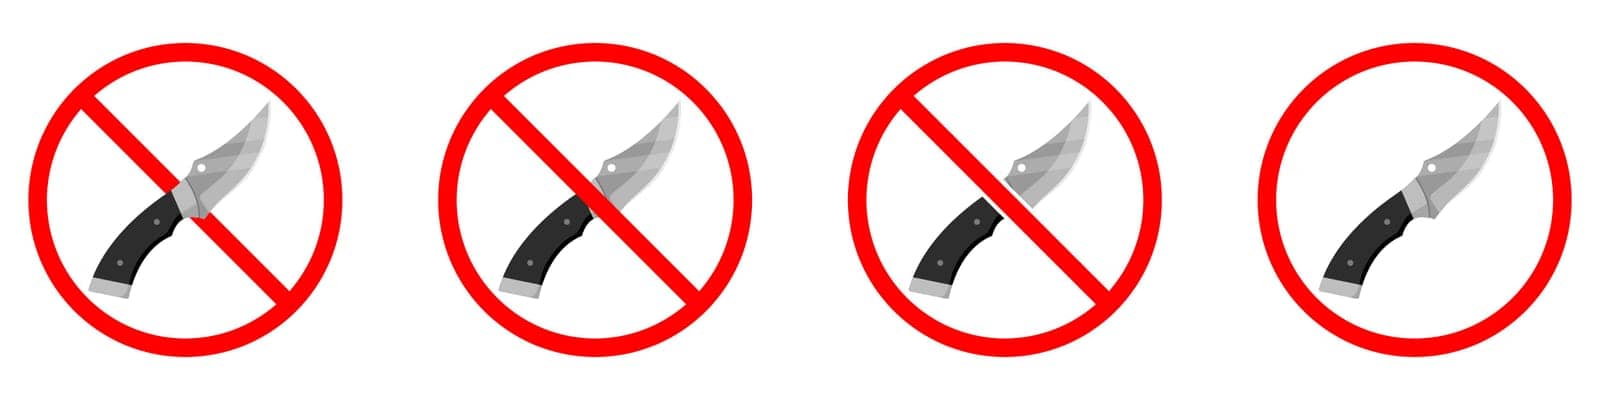 Knife ban sign. No Knife sign. Prohibition signs set. Dangerous weapon. by Chekman